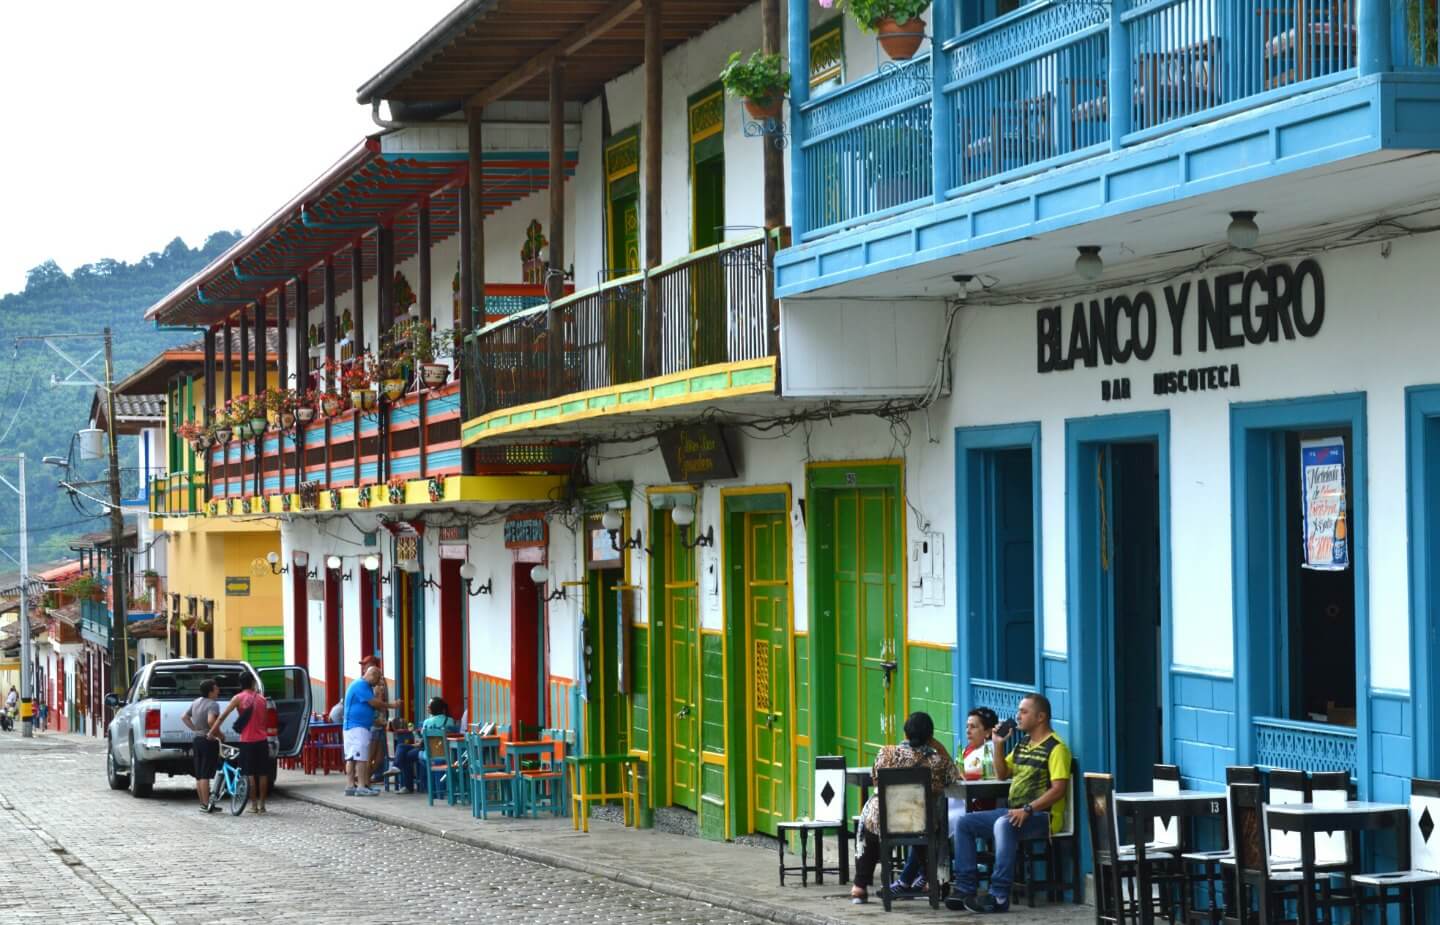 How to get the most out of 24 hours in Jardin, a charming colorful village located in the mountains of the Antioquia province, Colombia - Becci Abroad